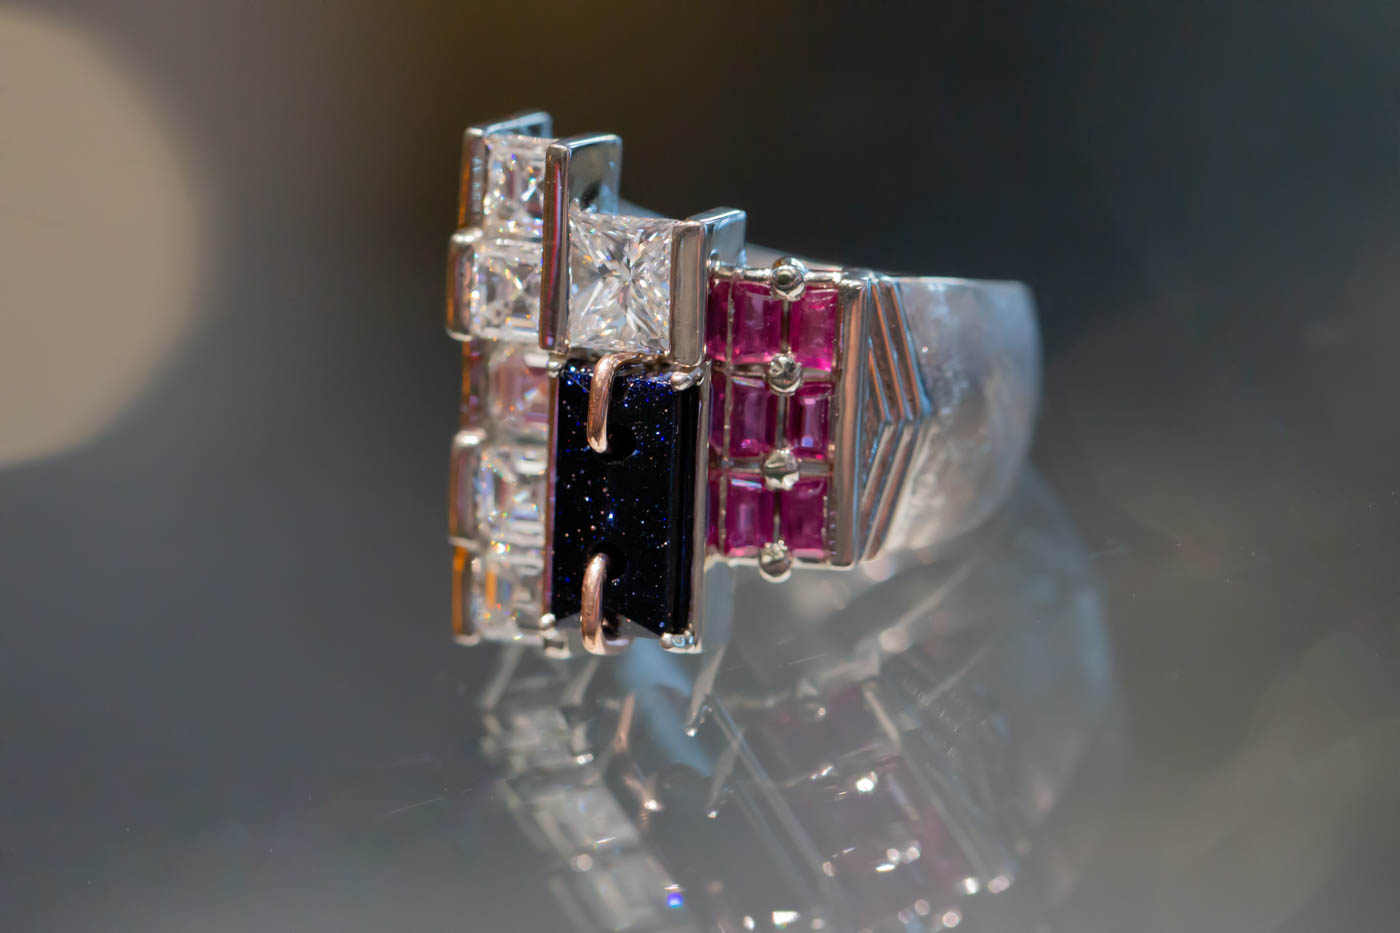 The Architecture Ring - White gold with diamonds,